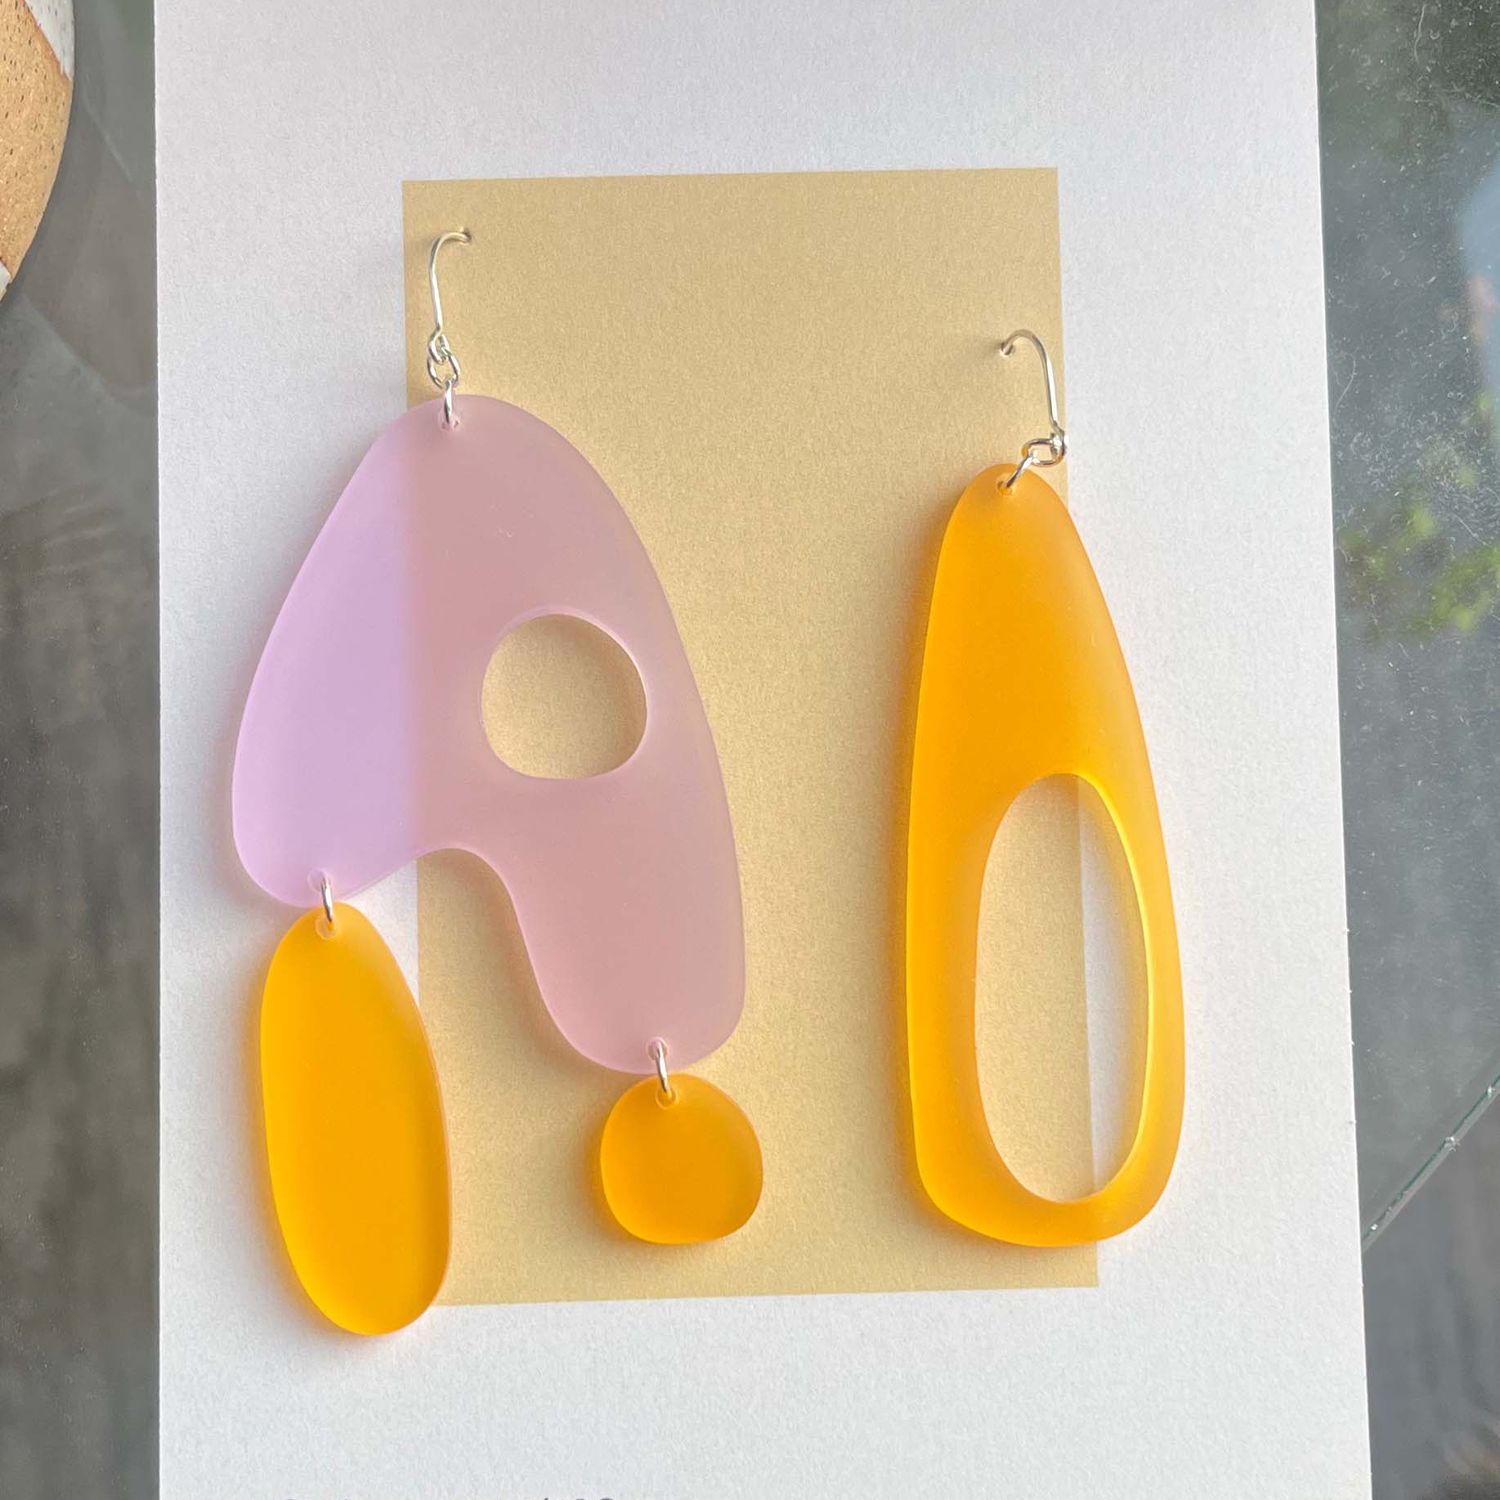 Nicnac: Fraternal Earrings in Lavender and Sun 2 Product Image 1 of 2